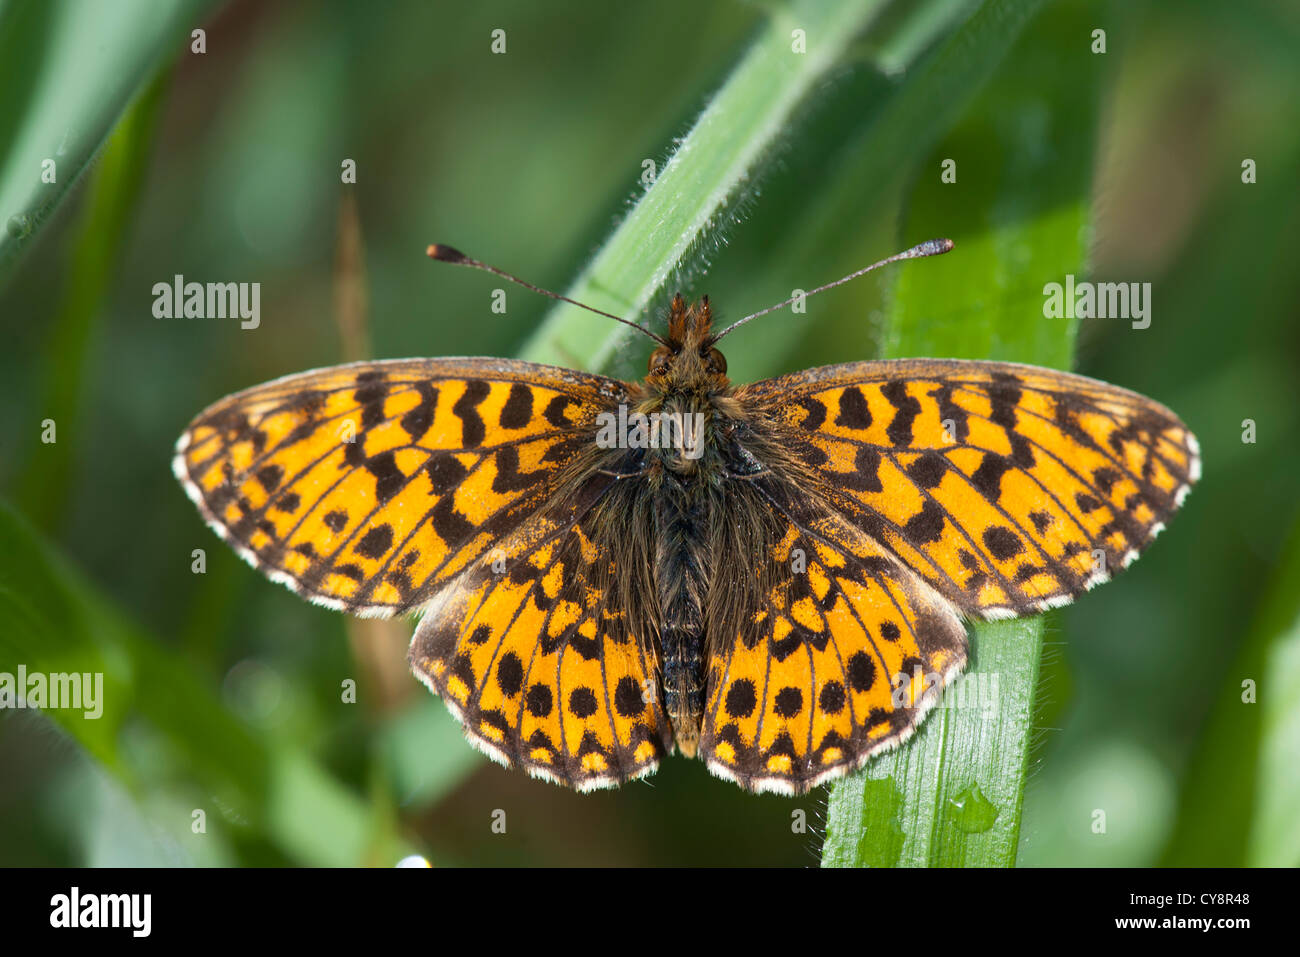 Butterfly flying among leaves Stock Photo